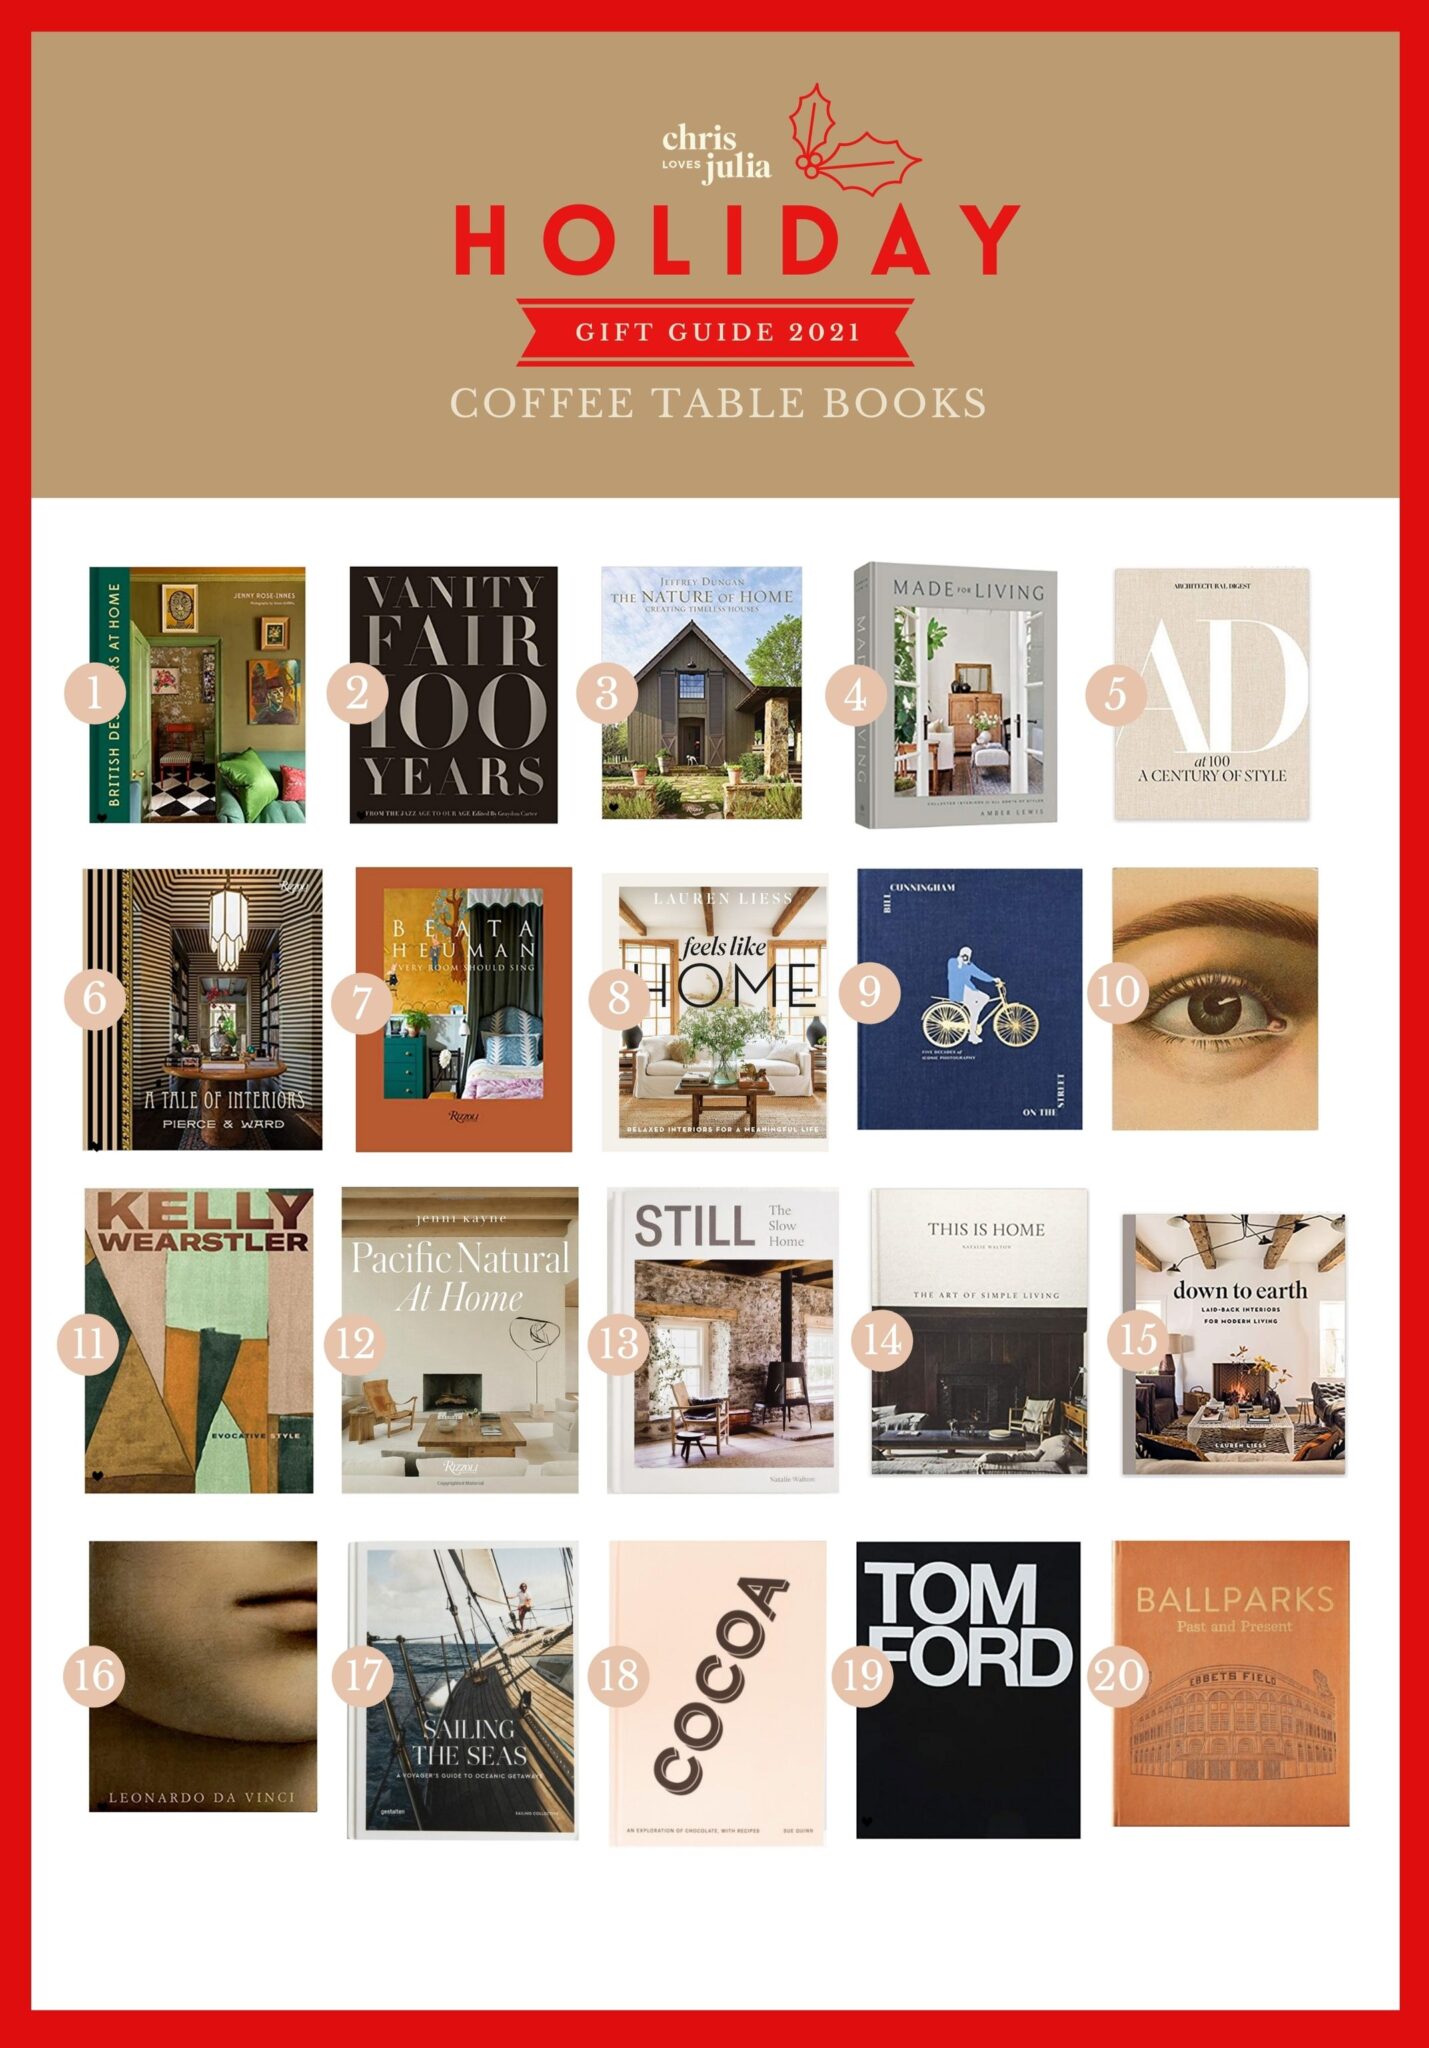 2021 Gift Guide: My Favorite Coffee Table Books to Gift - Chris Loves Julia